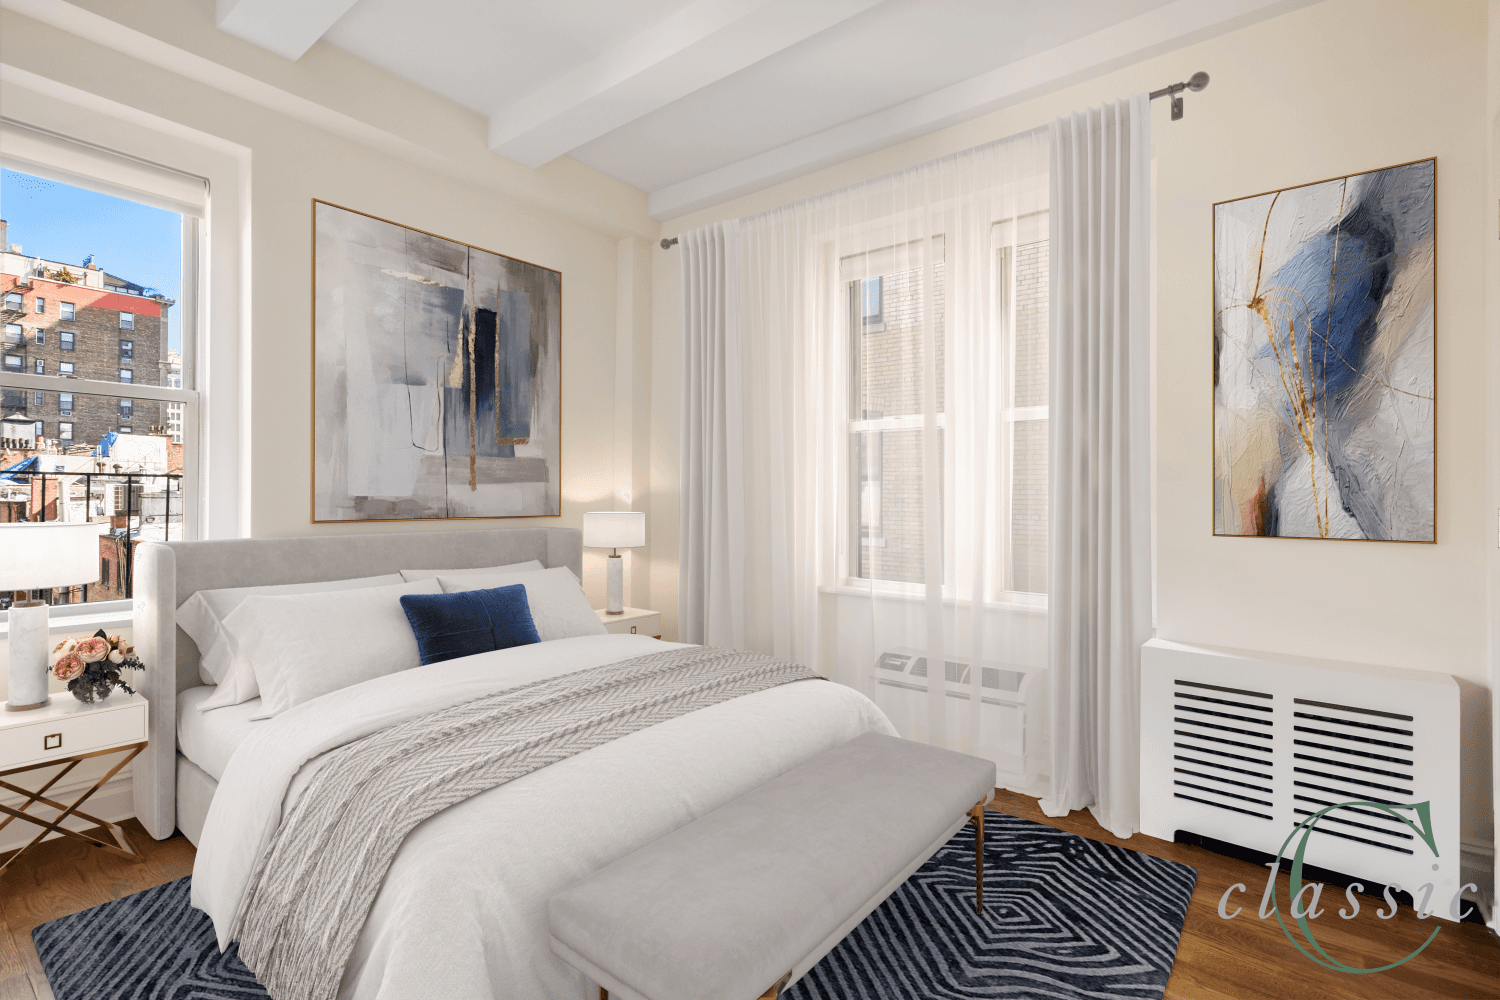 6H at 25 Fifth Avenue is a one bedroom prewar condominium dream with everything you could ask for in your new home !